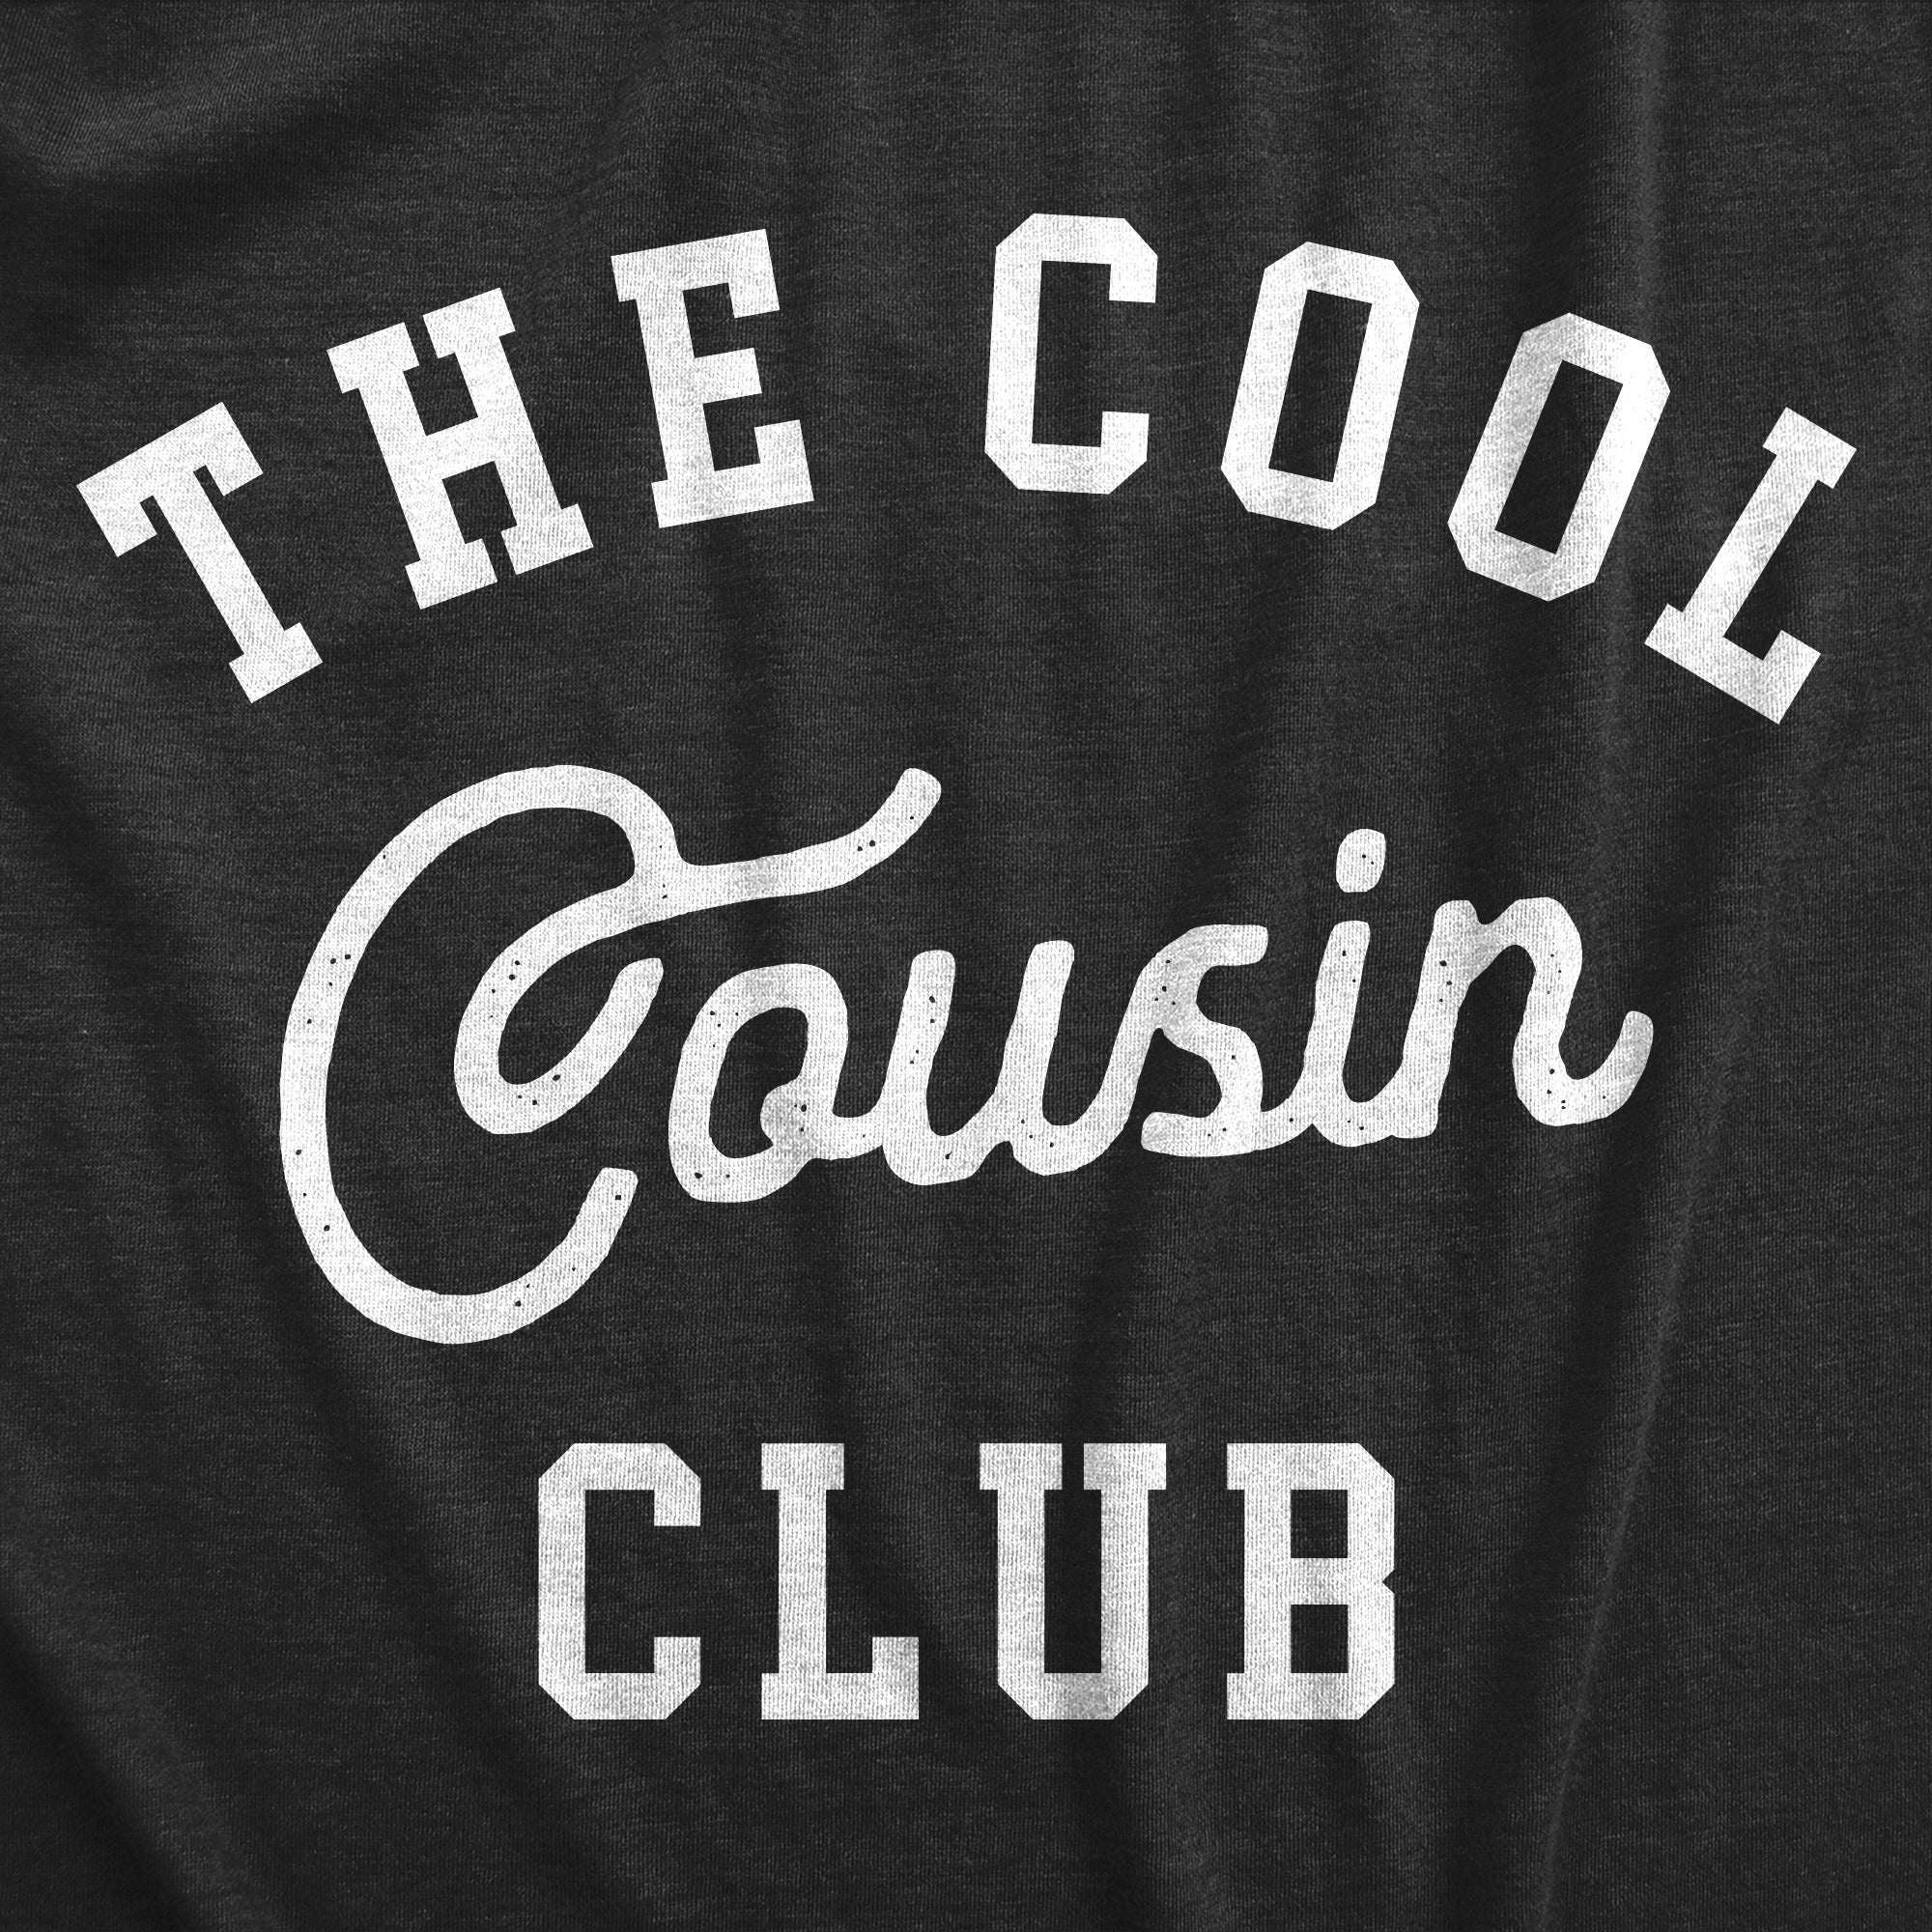 Funny Heather Black - Cool Cousin Club The Cool Cousin Club Mens T Shirt Nerdy Sarcastic Tee